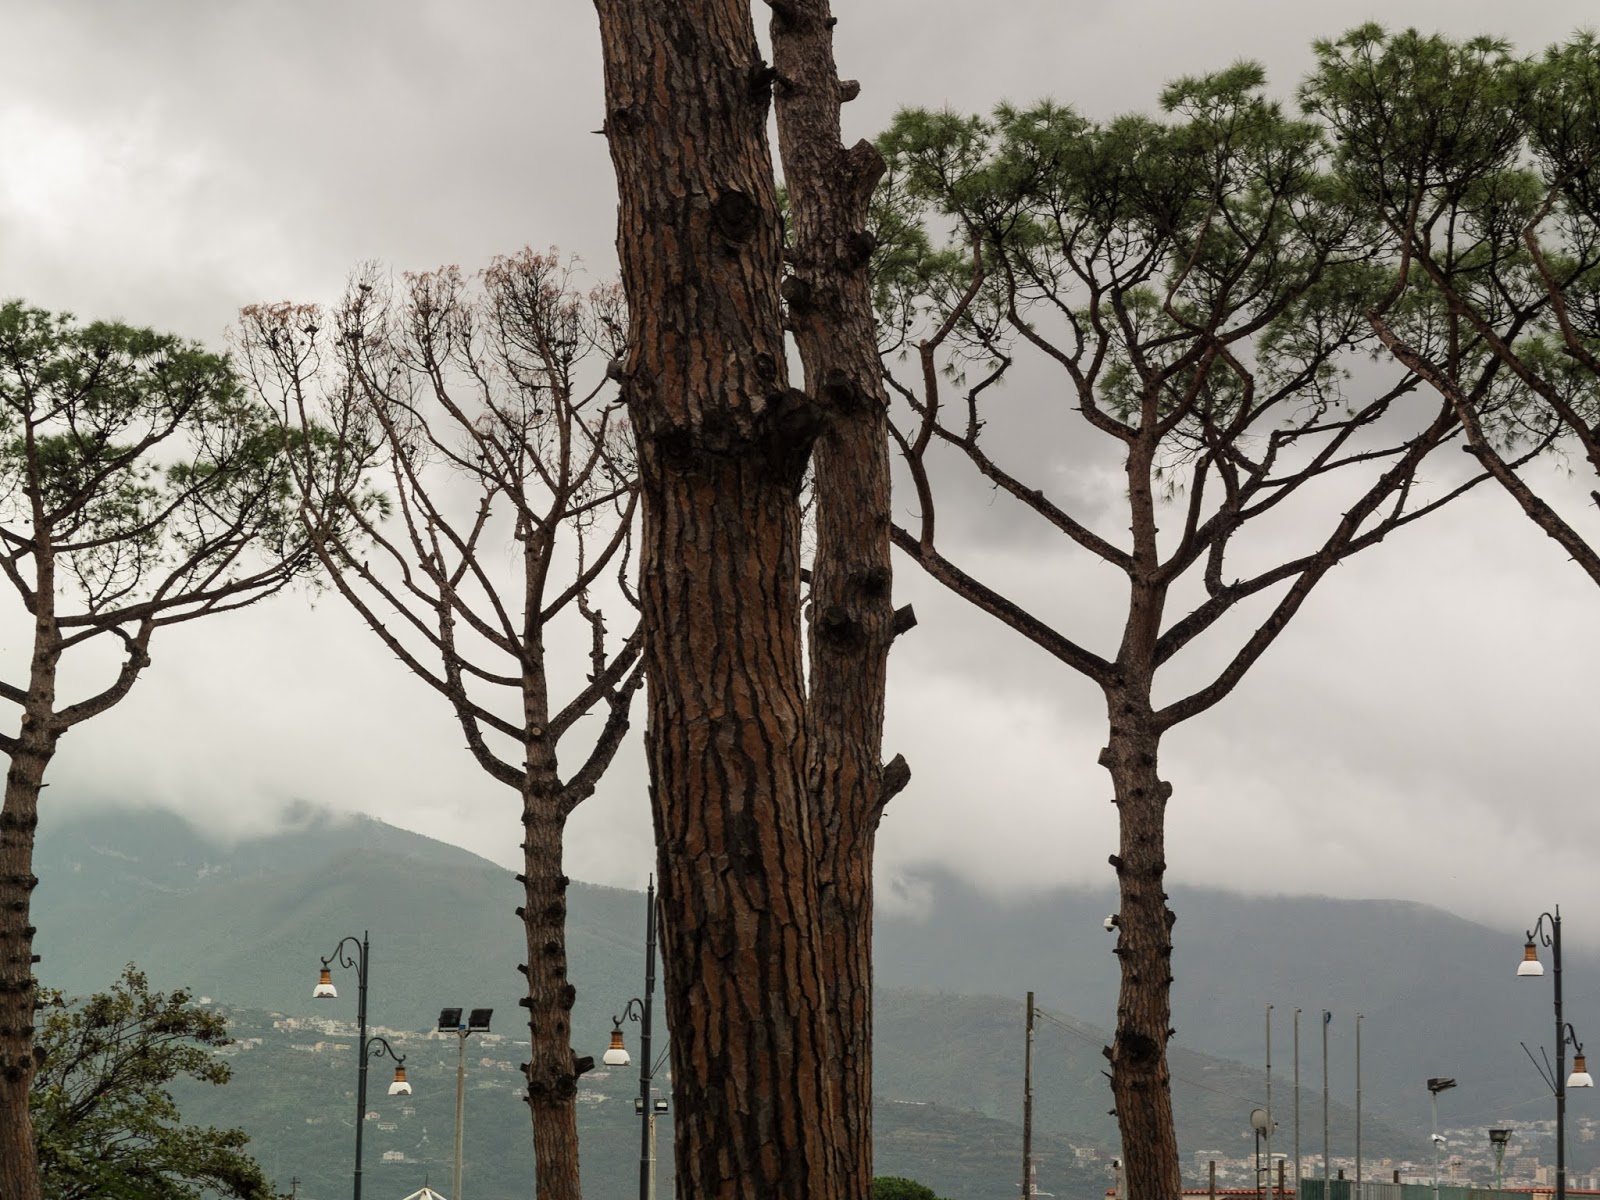 Tall fir trees at the Archaeological Park of Pompeii with Mount Vesuvius in the background.